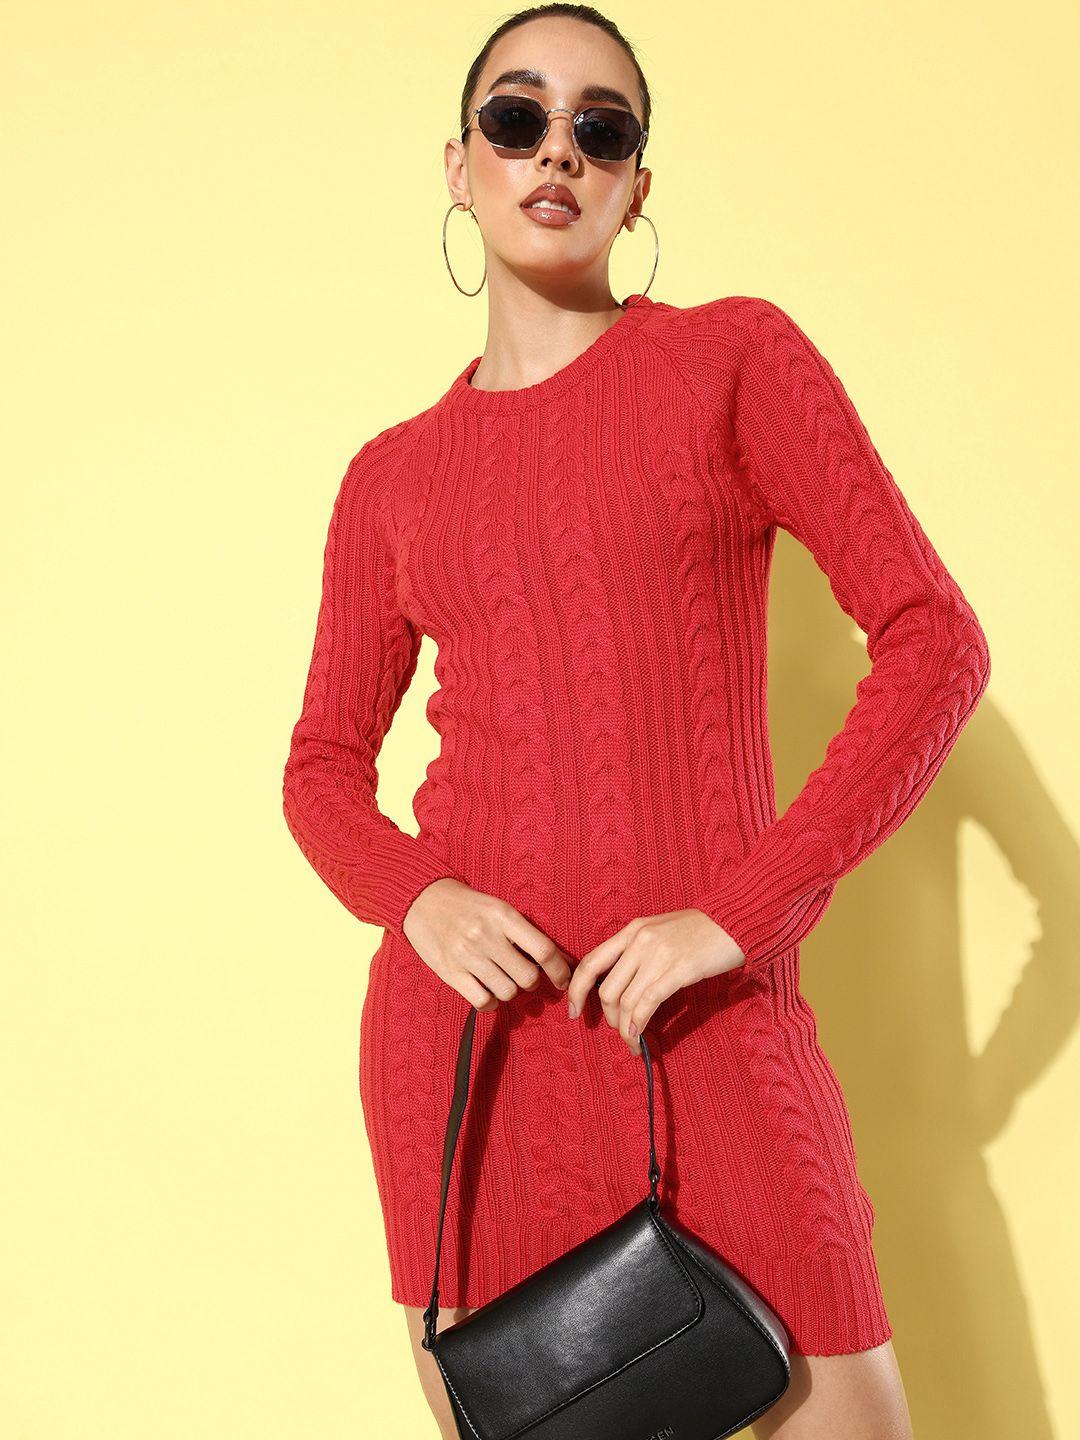 4wrd by dressberry long sleeves knitted bodycon jumper dress